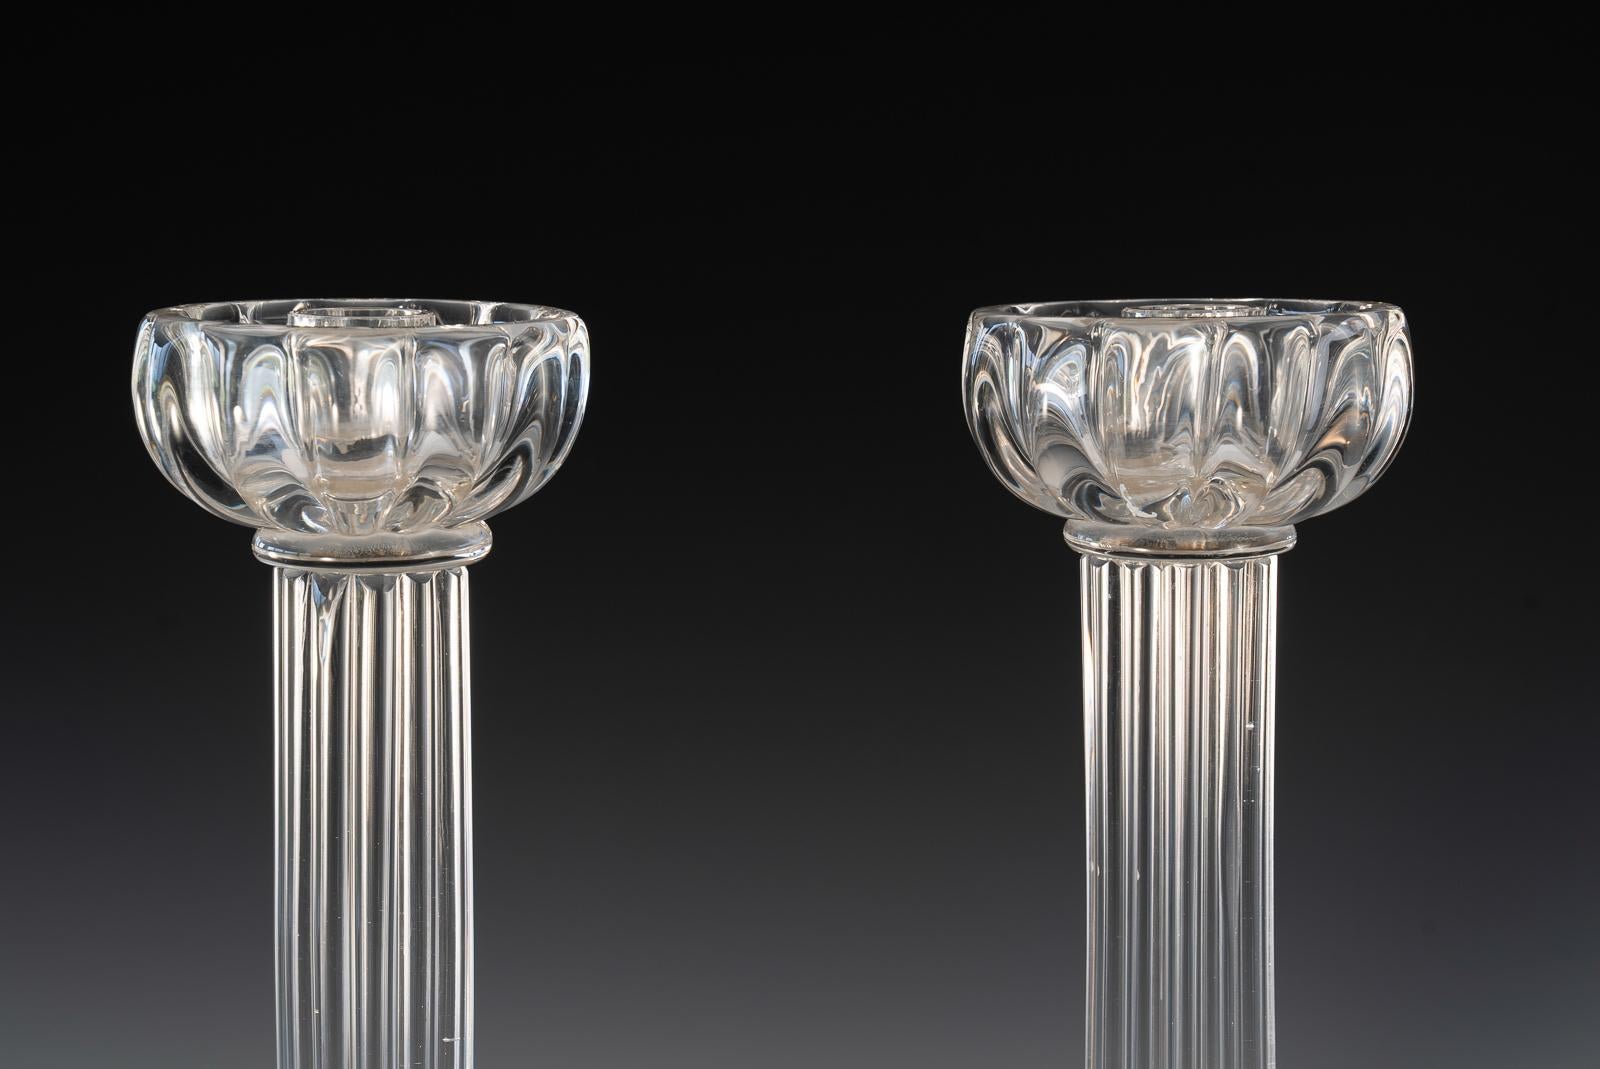 Pair of Seguso Candlesticks 2 by John Loring of Tiffany & Co. In Good Condition For Sale In Henley-on Thames, Oxfordshire